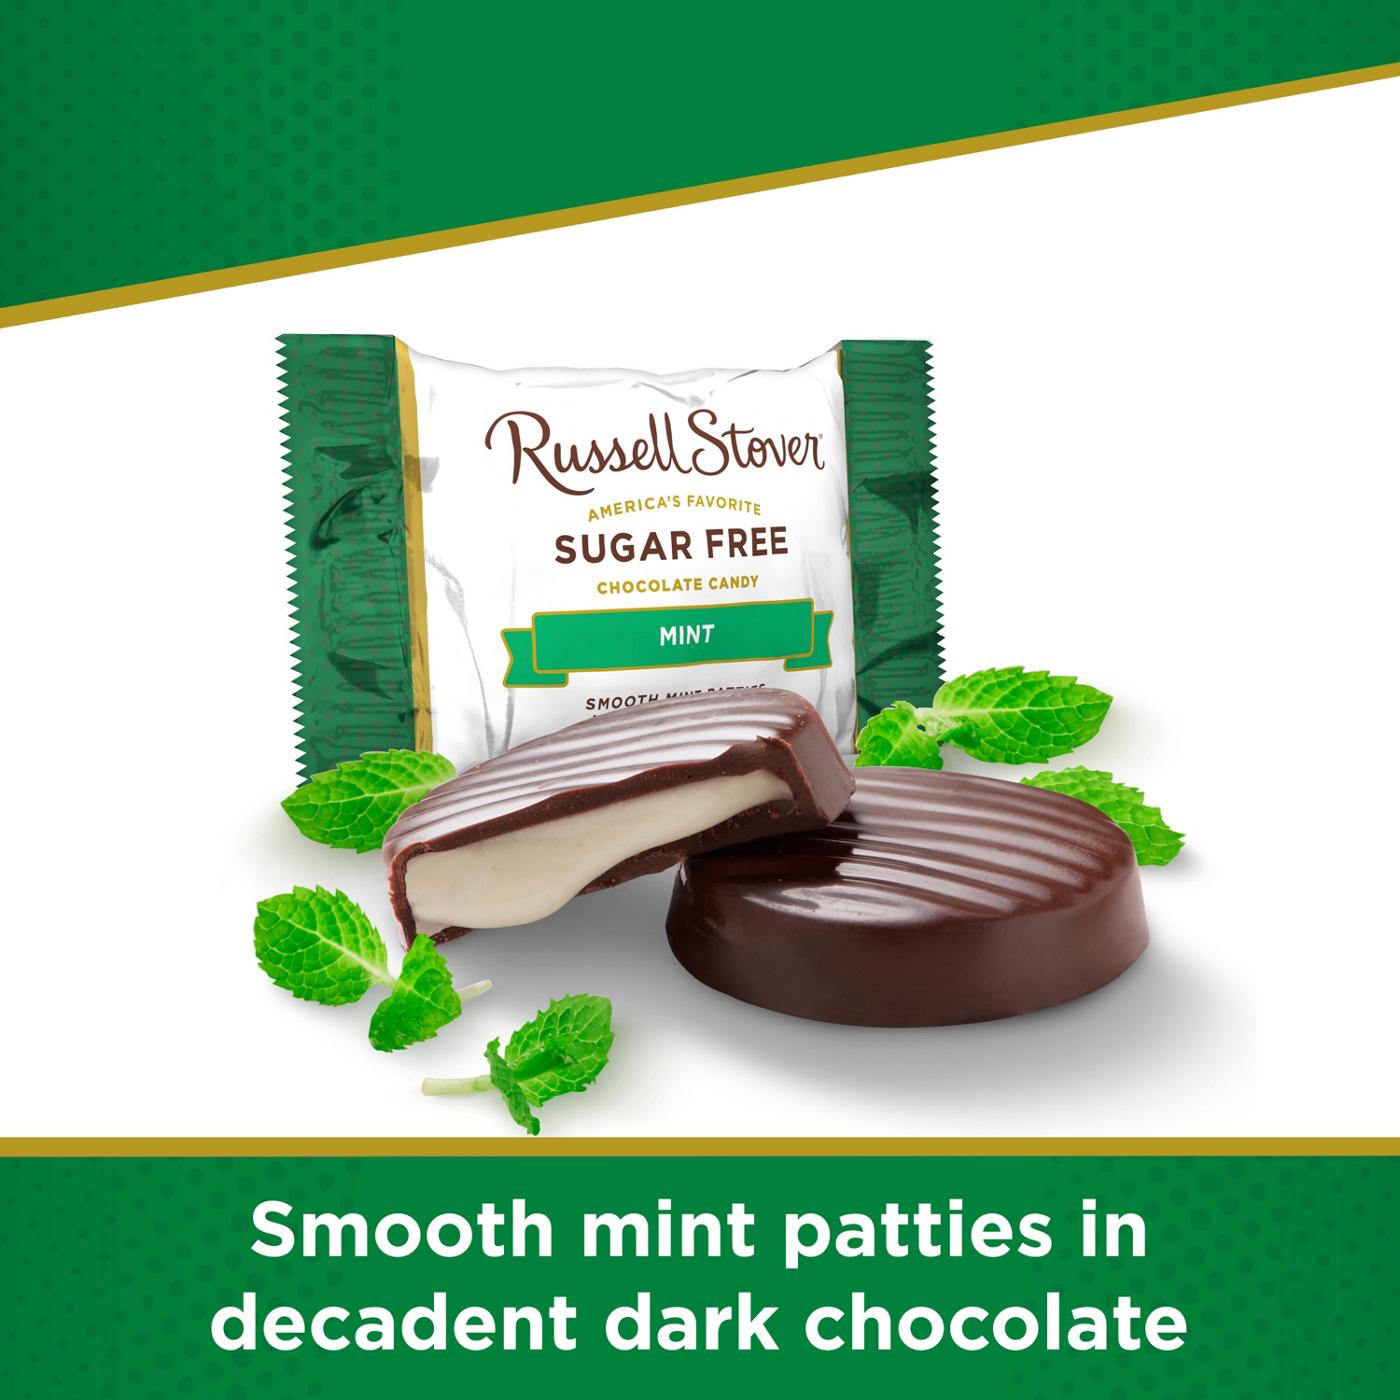 Russell Stover Sugar Free Mint Patties; image 6 of 8